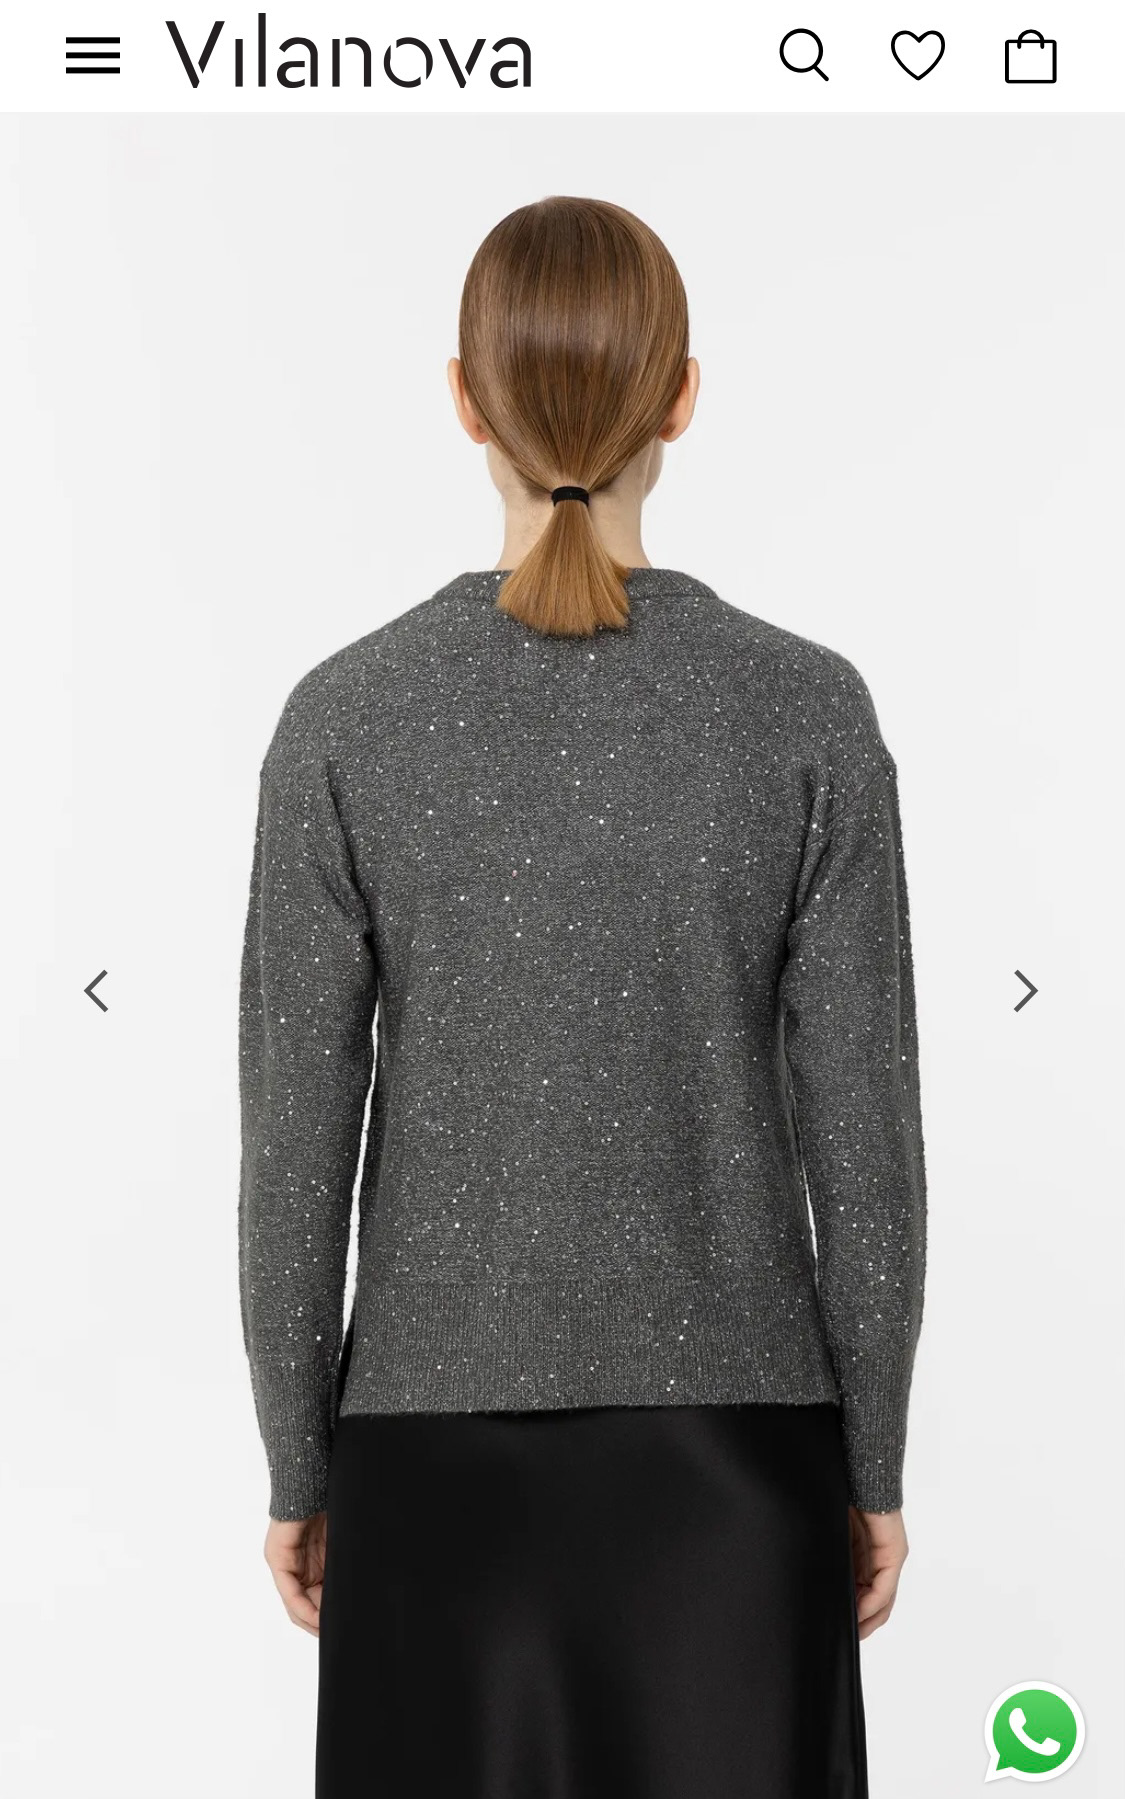 sequins Sweaters knitwear fashiondesign